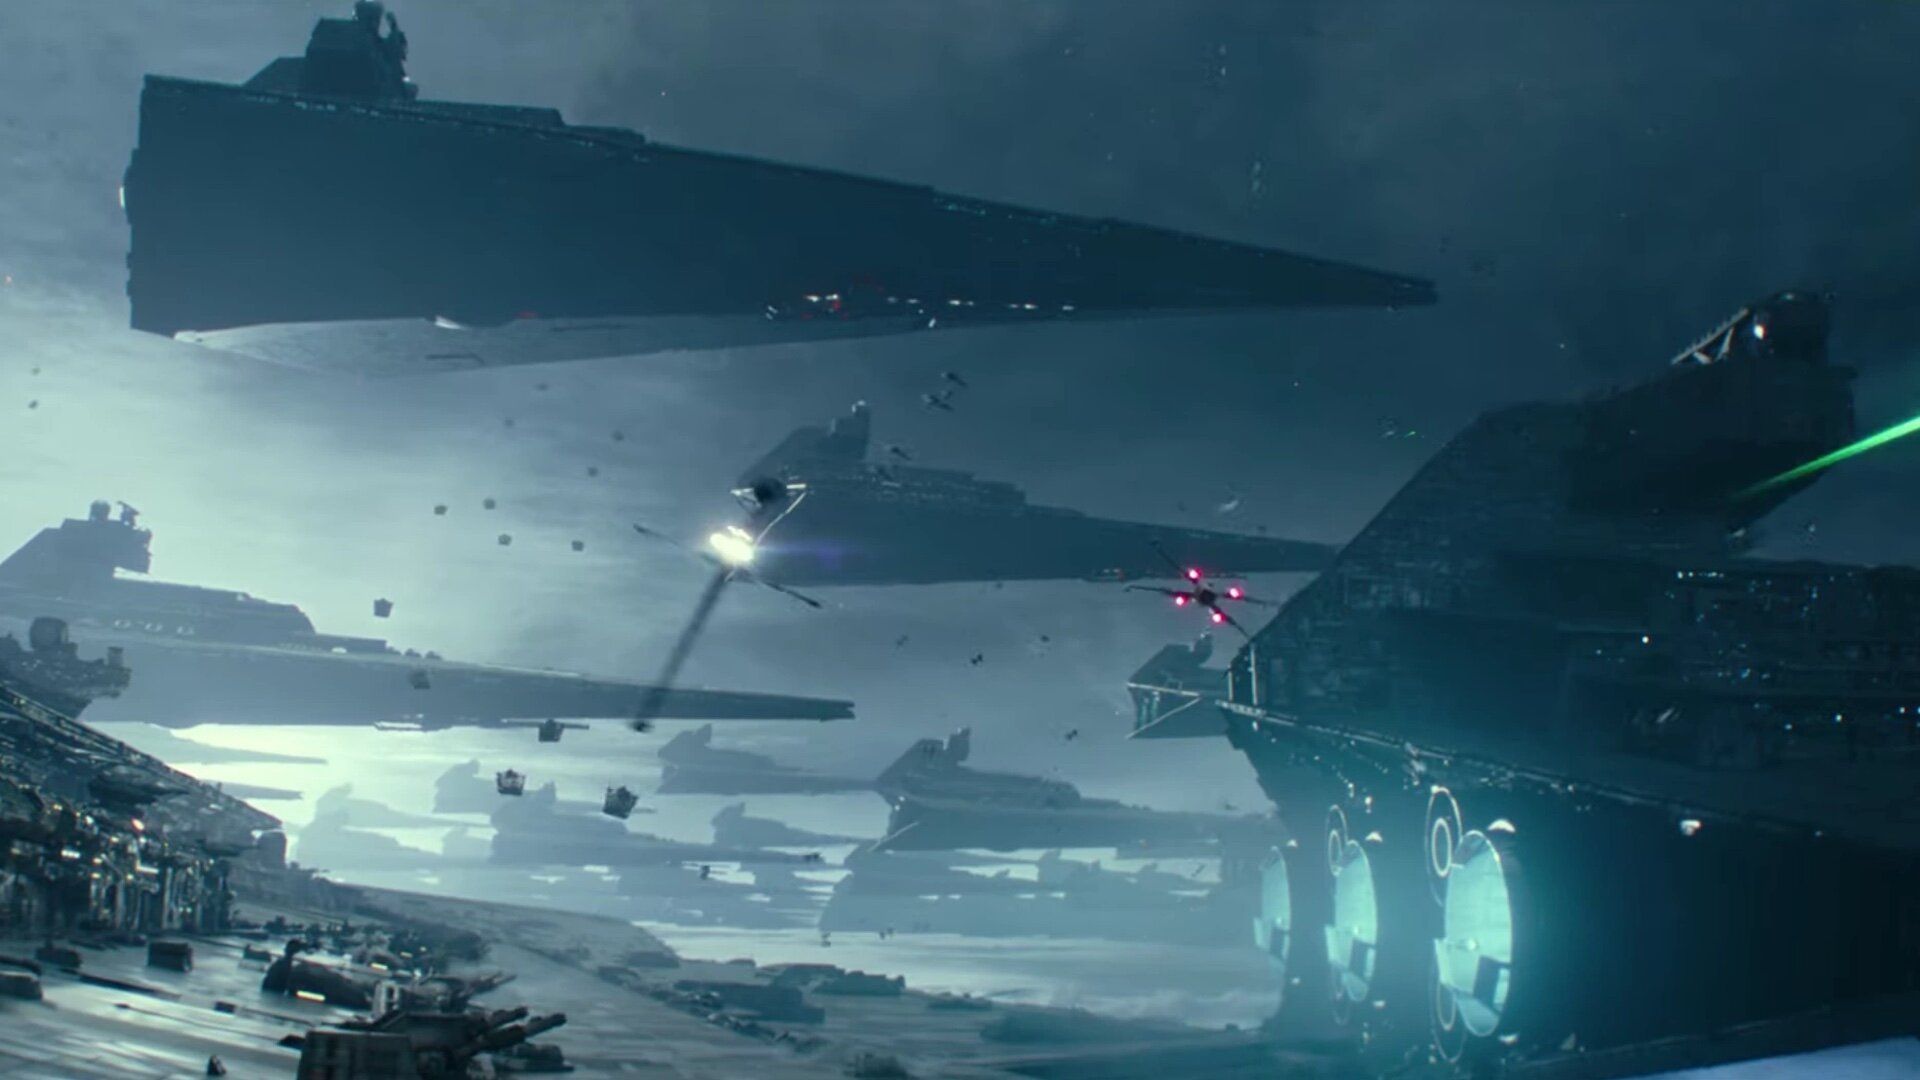 New Info on How Emperor Palpatine Came Back and Built His Star Destroyer Fleet in THE RISE OF SKYWALKER